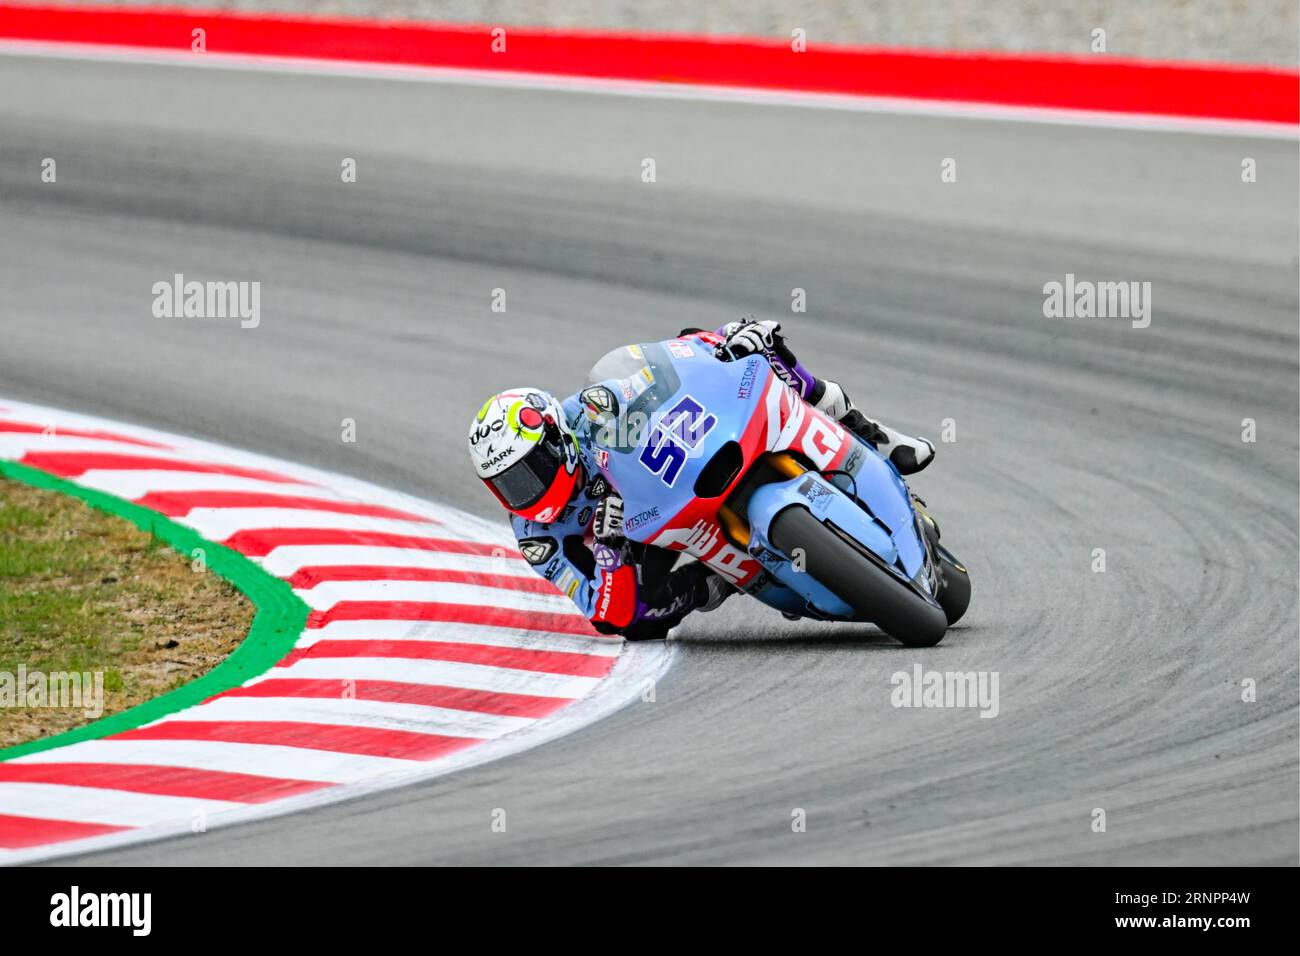 Jeremy Alcoba (52) of Spain and QJMOTOR Gresini Moto2 during the MOTO 2 QUALIFYING of the Catalunya Grand Prix at Montmelo racetrack, Spain on September 02, 2023 (Photo Alvaro Sanchez) Credit CORDON